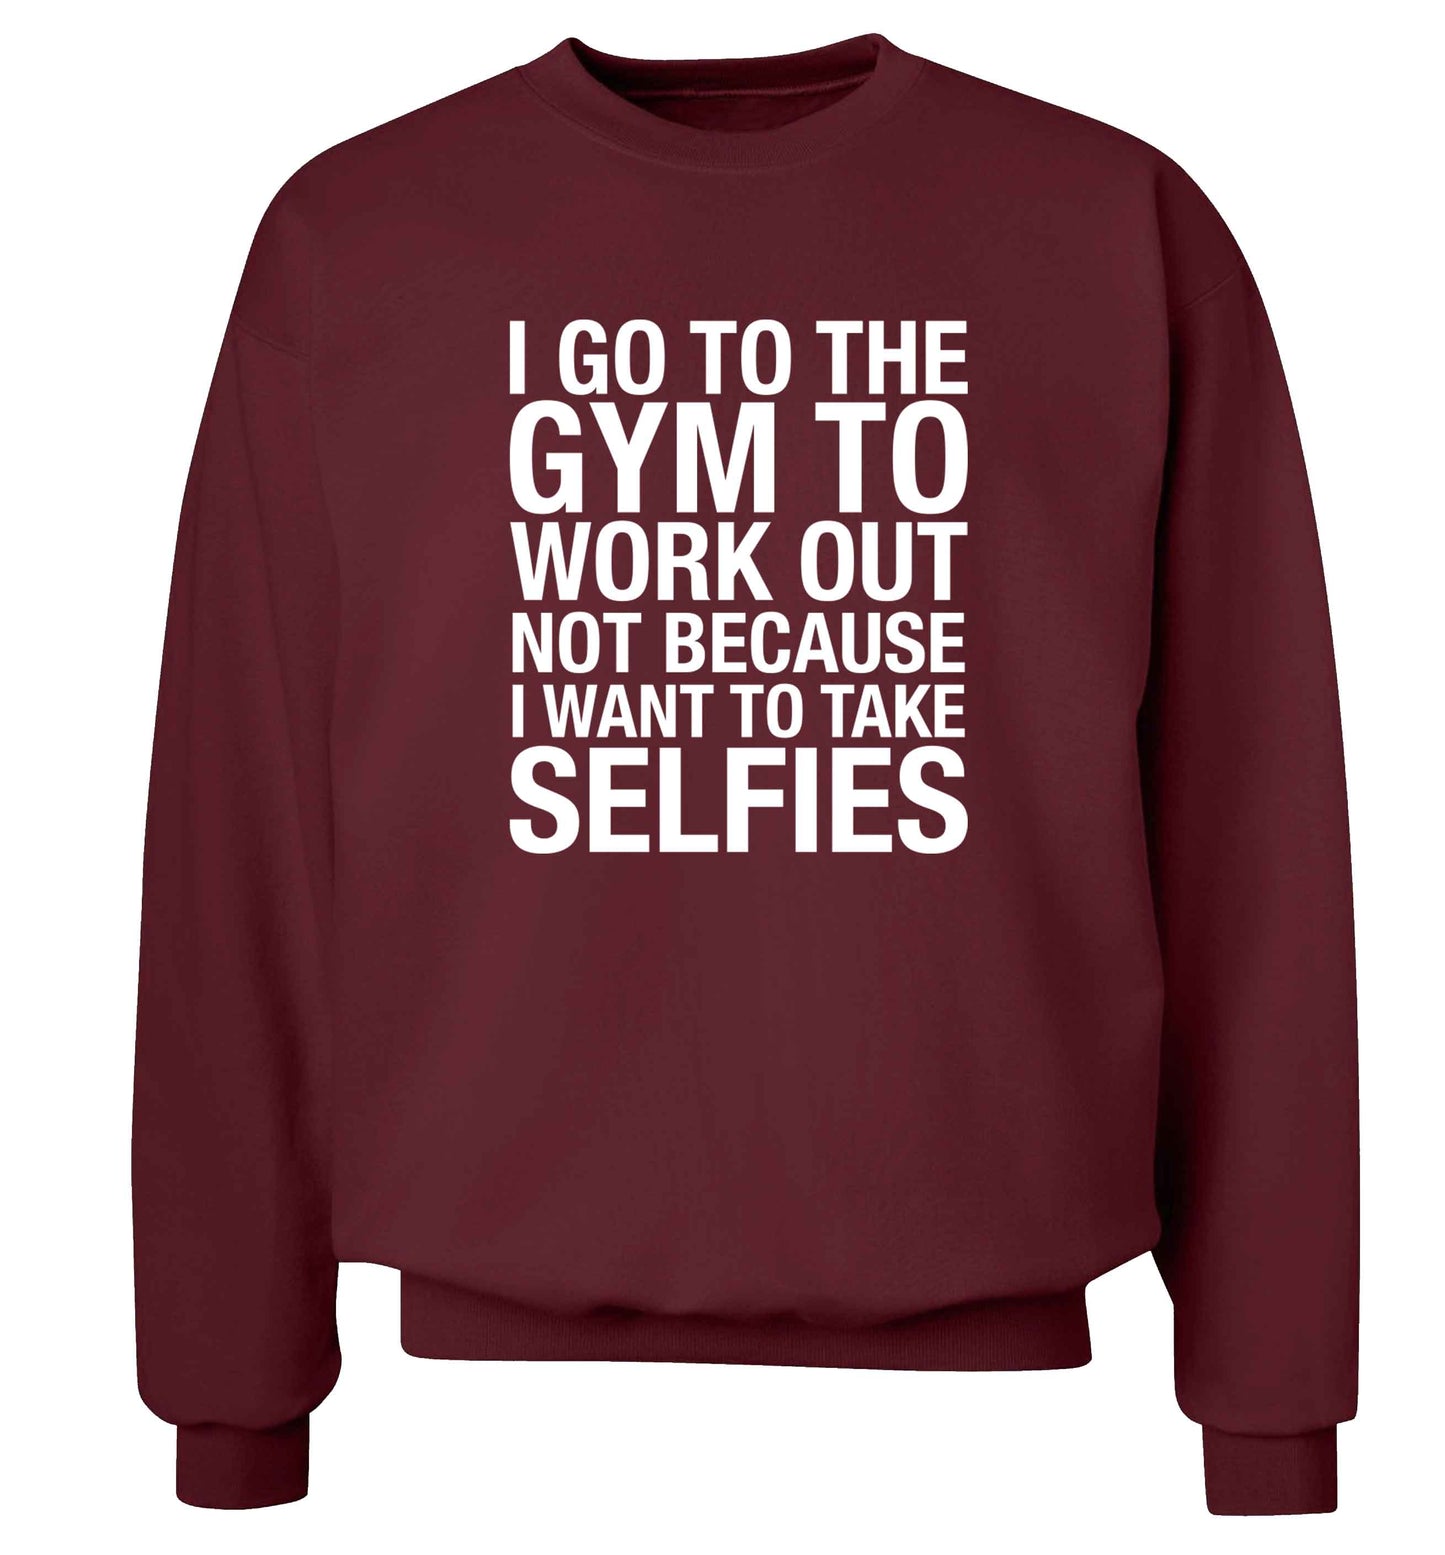 I go to the gym to workout not to take selfies adult's unisex maroon sweater 2XL